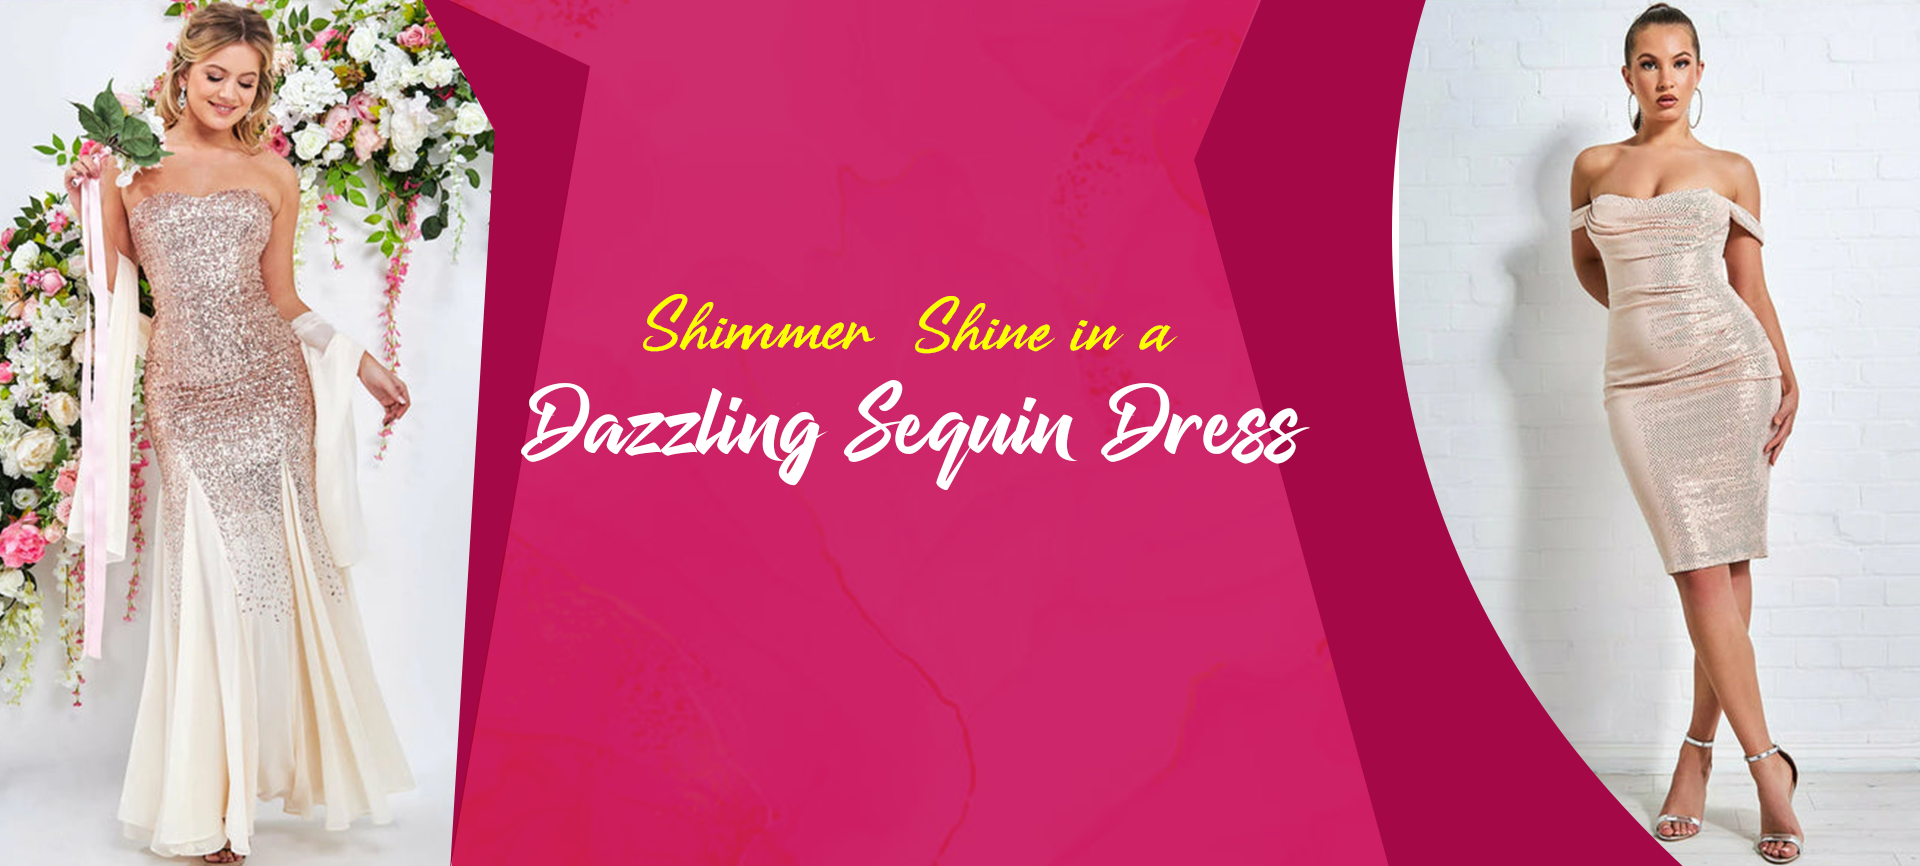 Shimmer and Shine in a Dazzling Sequin Dress